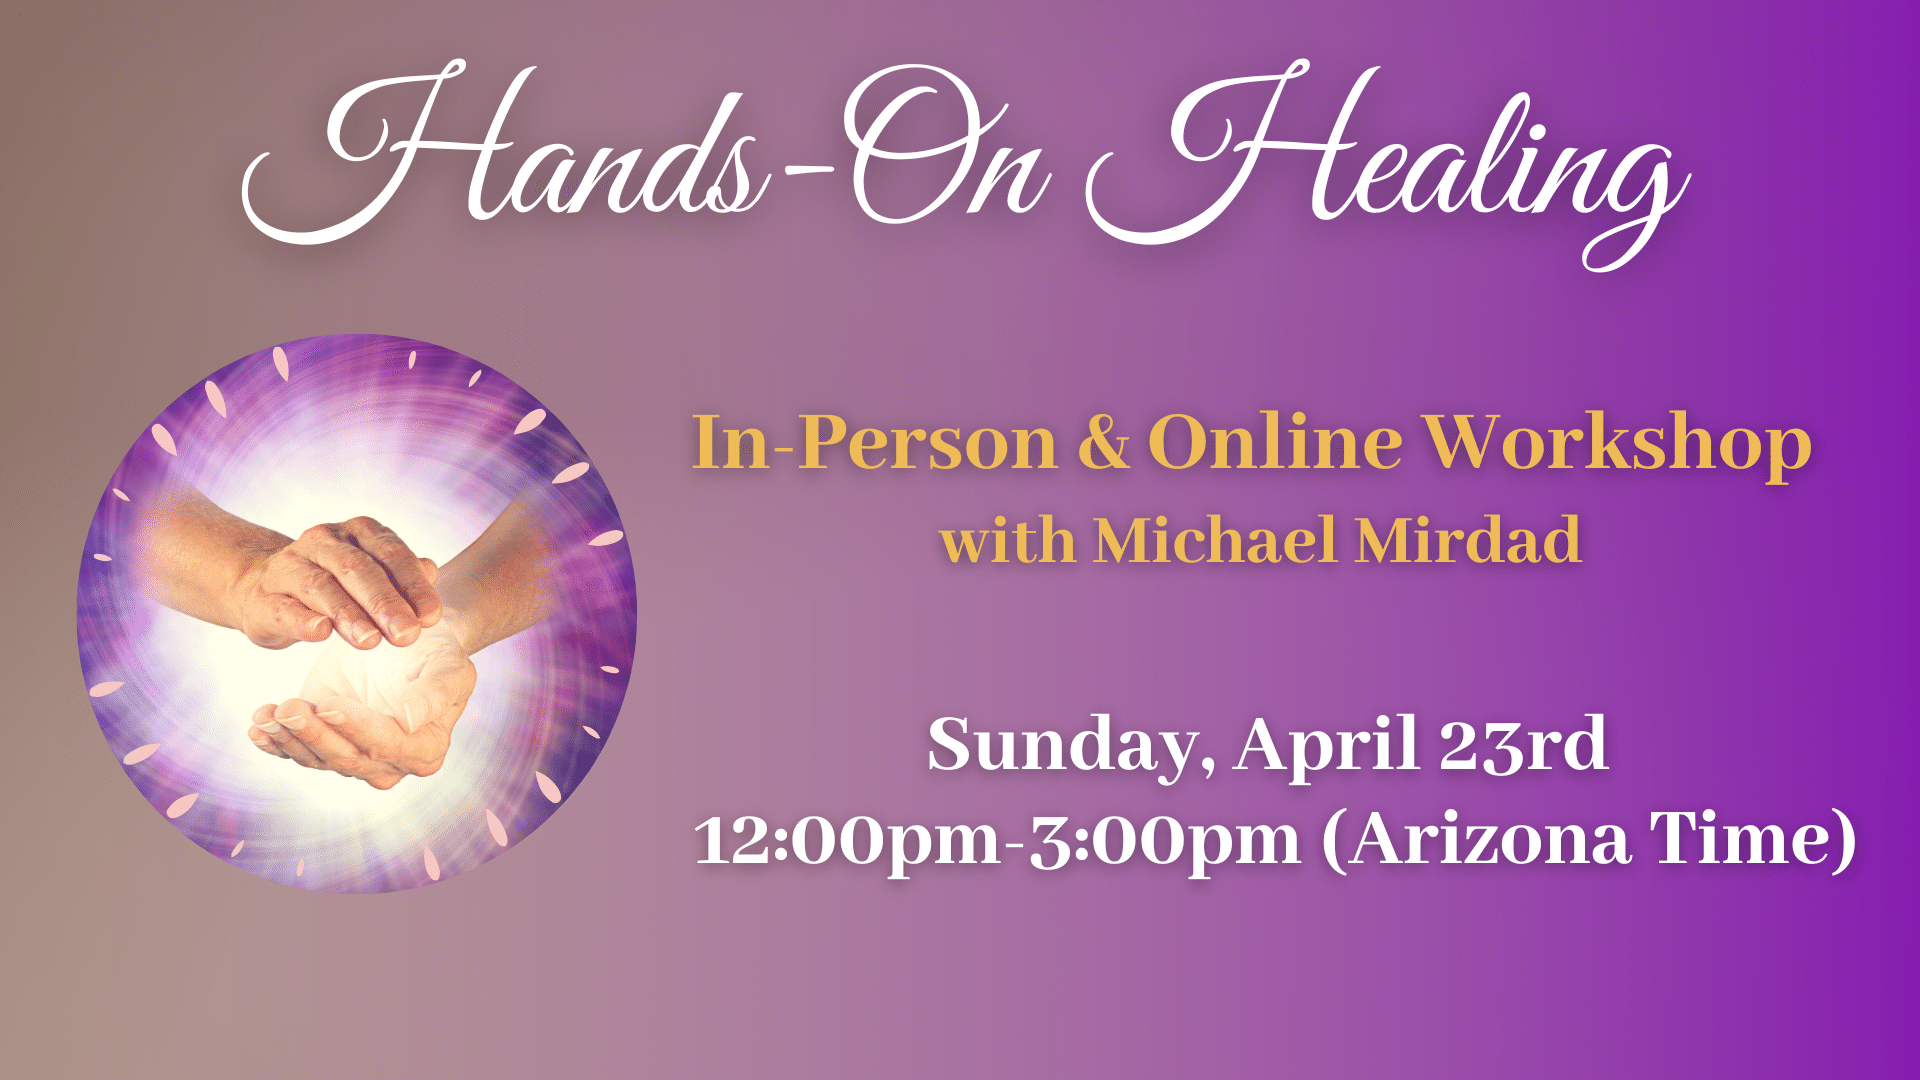 Hands-on healing and spiritual guidance workshop with Michael, promoting spiritual growth.